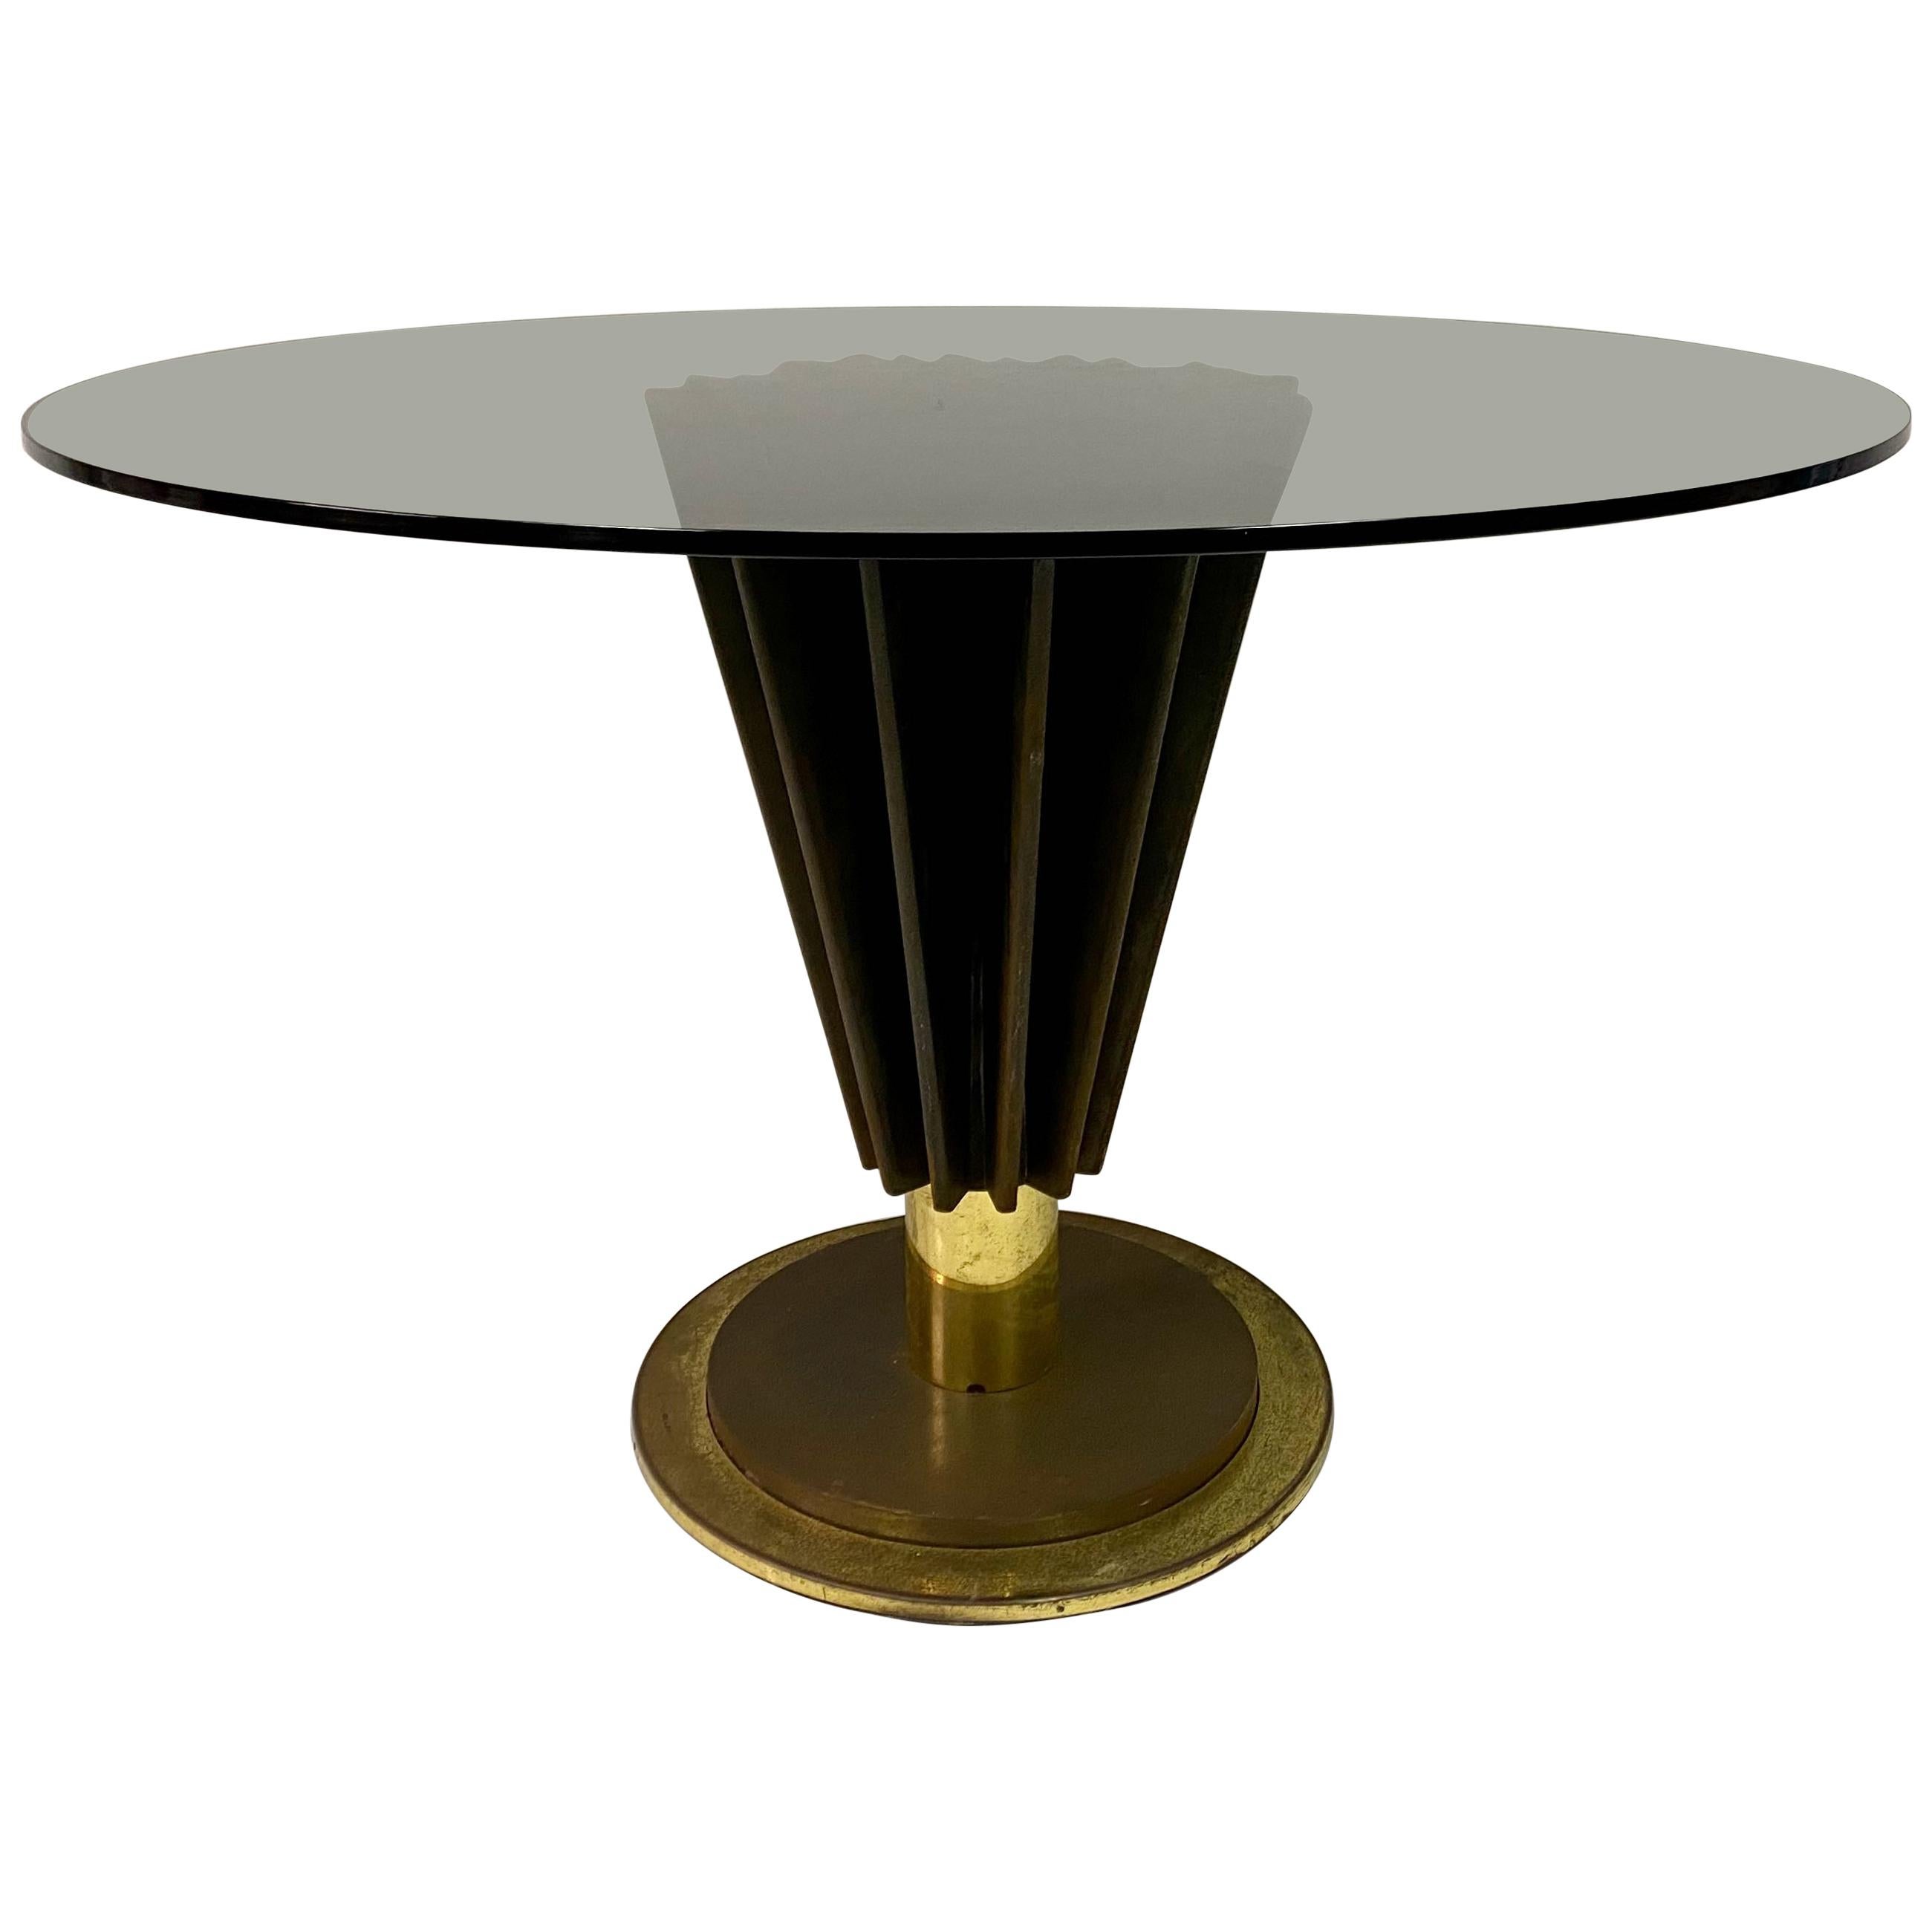 1970s Brass and Iron Circular Dining Table by Pierre Cardin